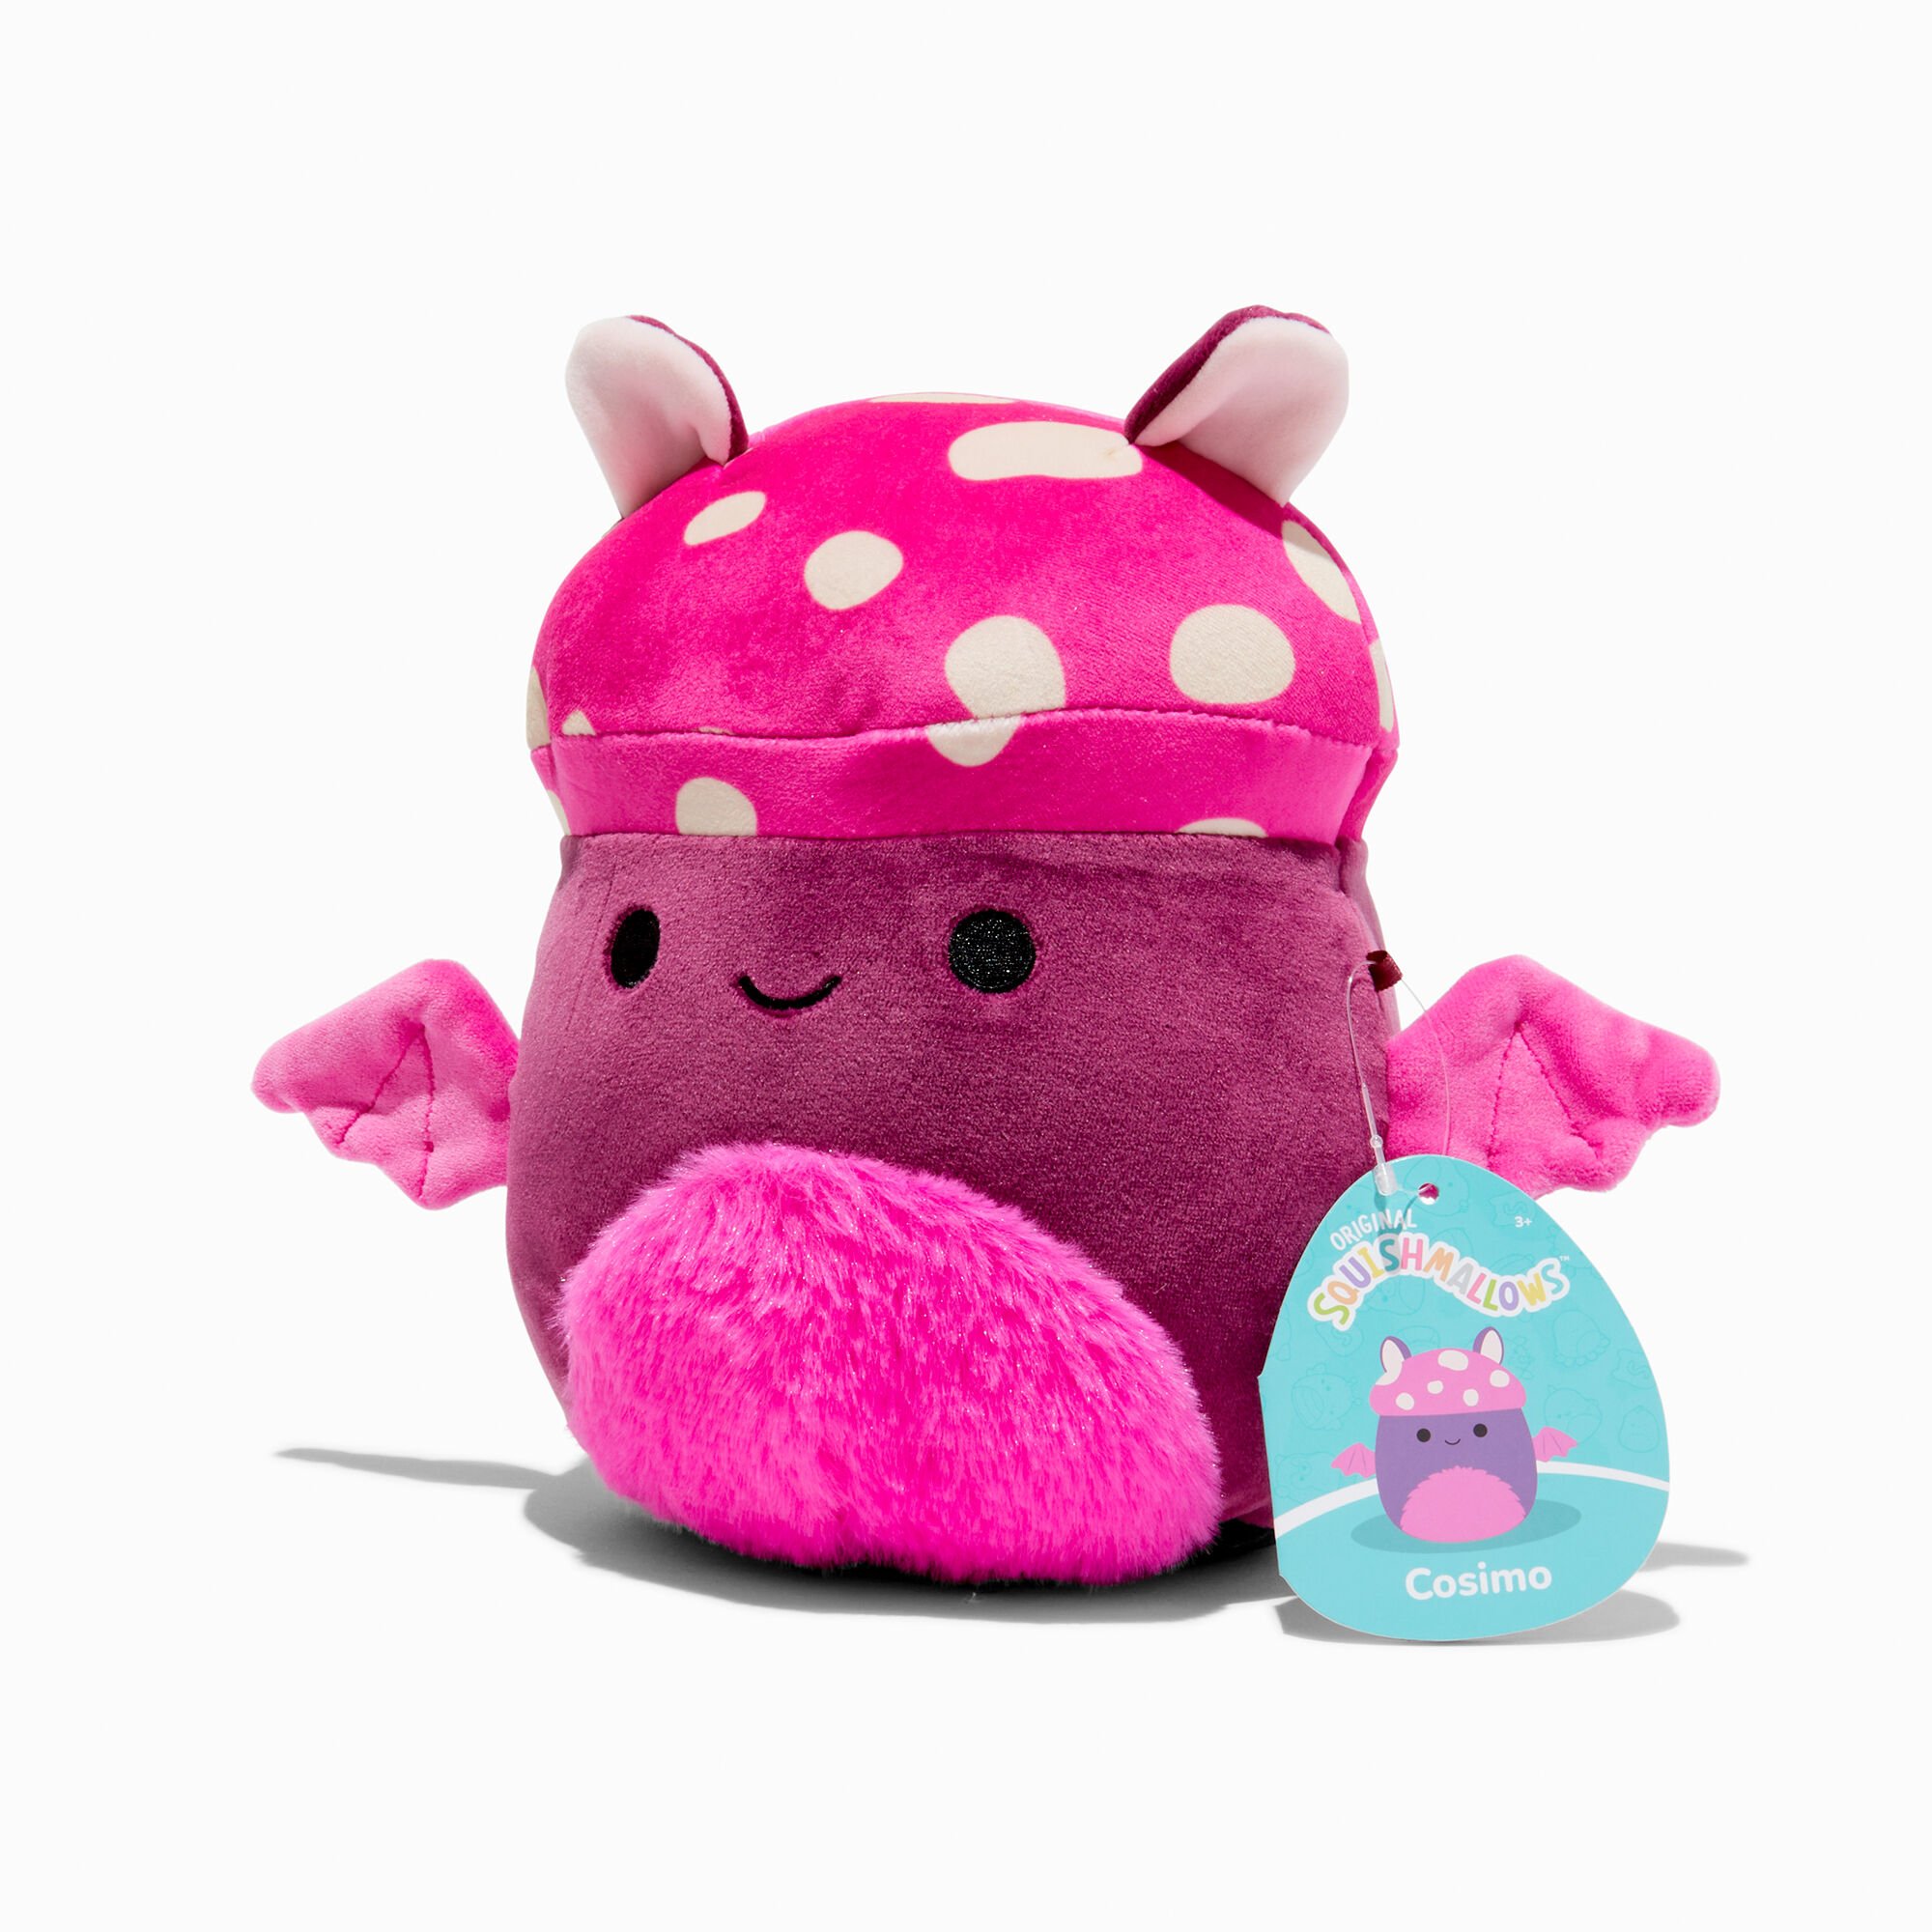 View Claires Squishmallows 8 Cosimo Plush Toy information